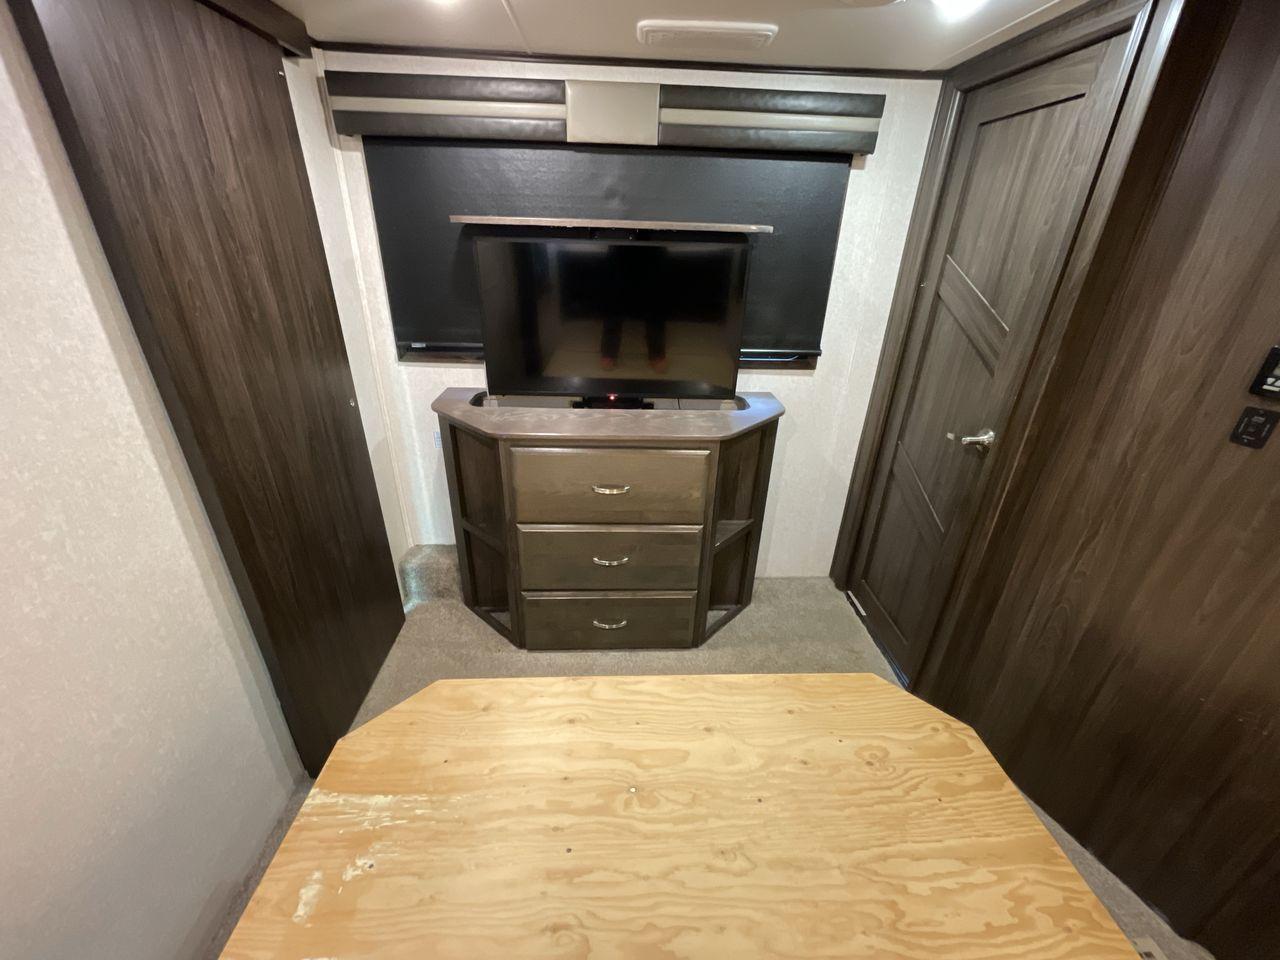 2018 GRAY JAYCO SEISMIC 4250 - (1UJCJSCV5J1) , Length: 44.92 ft. | Dry Weight: 15,570 lbs. | Gross Weight: 20,000 lbs. | Slides: 3 transmission, located at 4319 N Main St, Cleburne, TX, 76033, (817) 678-5133, 32.385960, -97.391212 - Set out to the great outdoors in this 2018 Jayco Seismic 4250 and enjoy all the amenities it has to offer! This toy hauler measures just a bit under 45 ft. in length and 13.32 ft. in height, providing great space and comfort. It has a dry weight of 15,570 lbs. and a GVWR of 20,000 lbs. It also comes - Photo #18